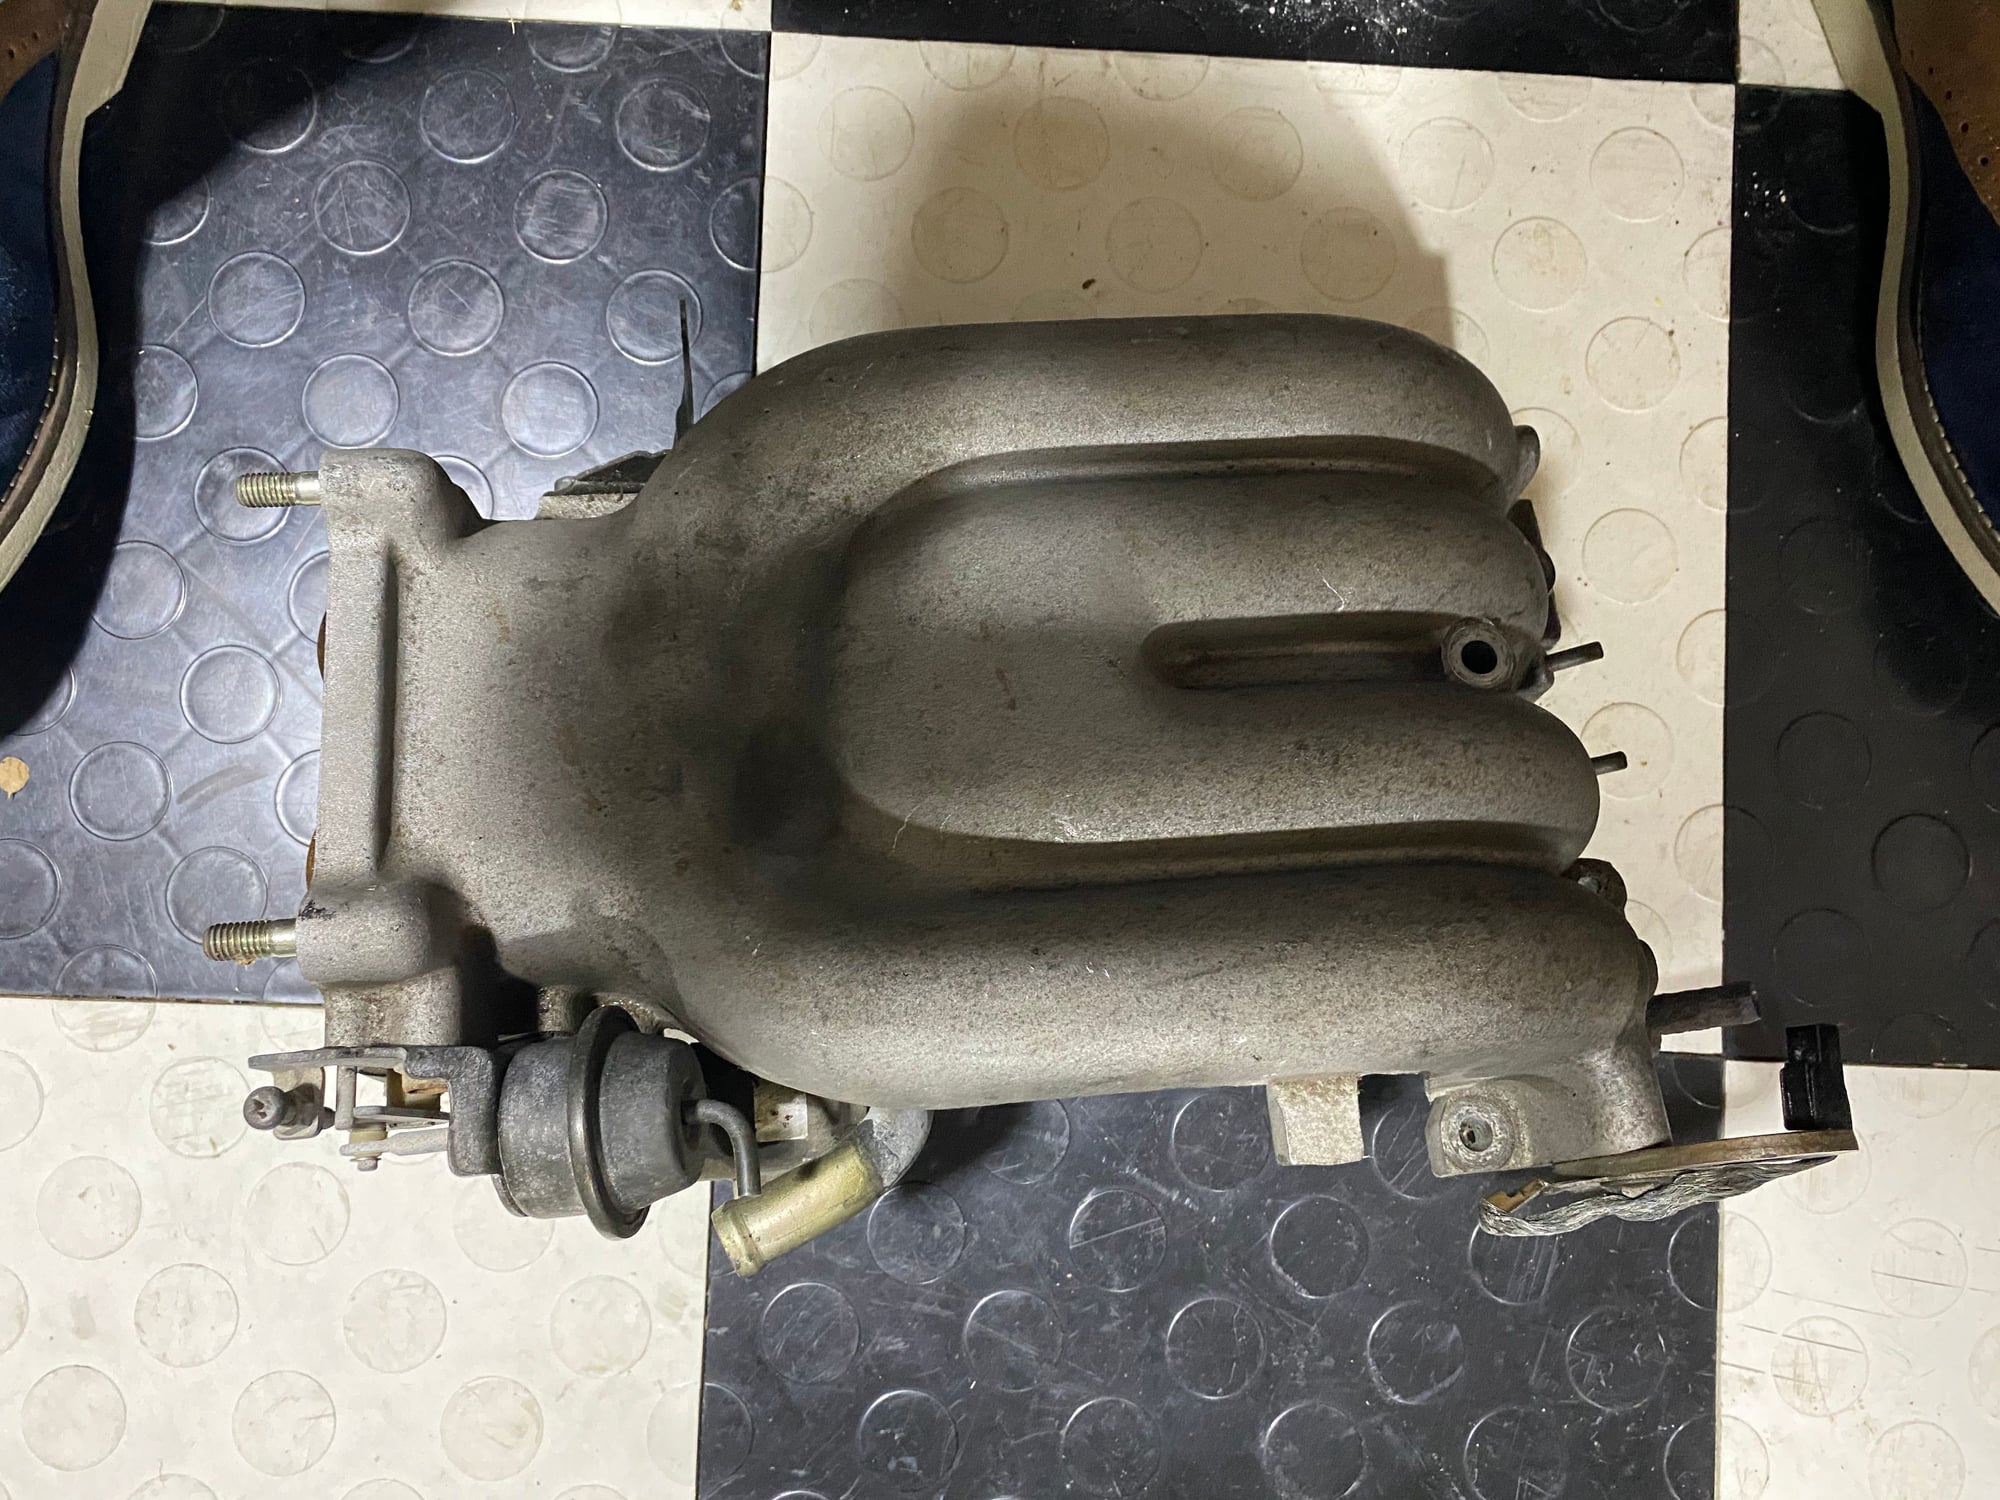 Engine - Intake/Fuel - FD Upper and Lower Intake manifolds - Used - 1993 to 1995 Mazda RX-7 - Lantana, TX 76226, United States